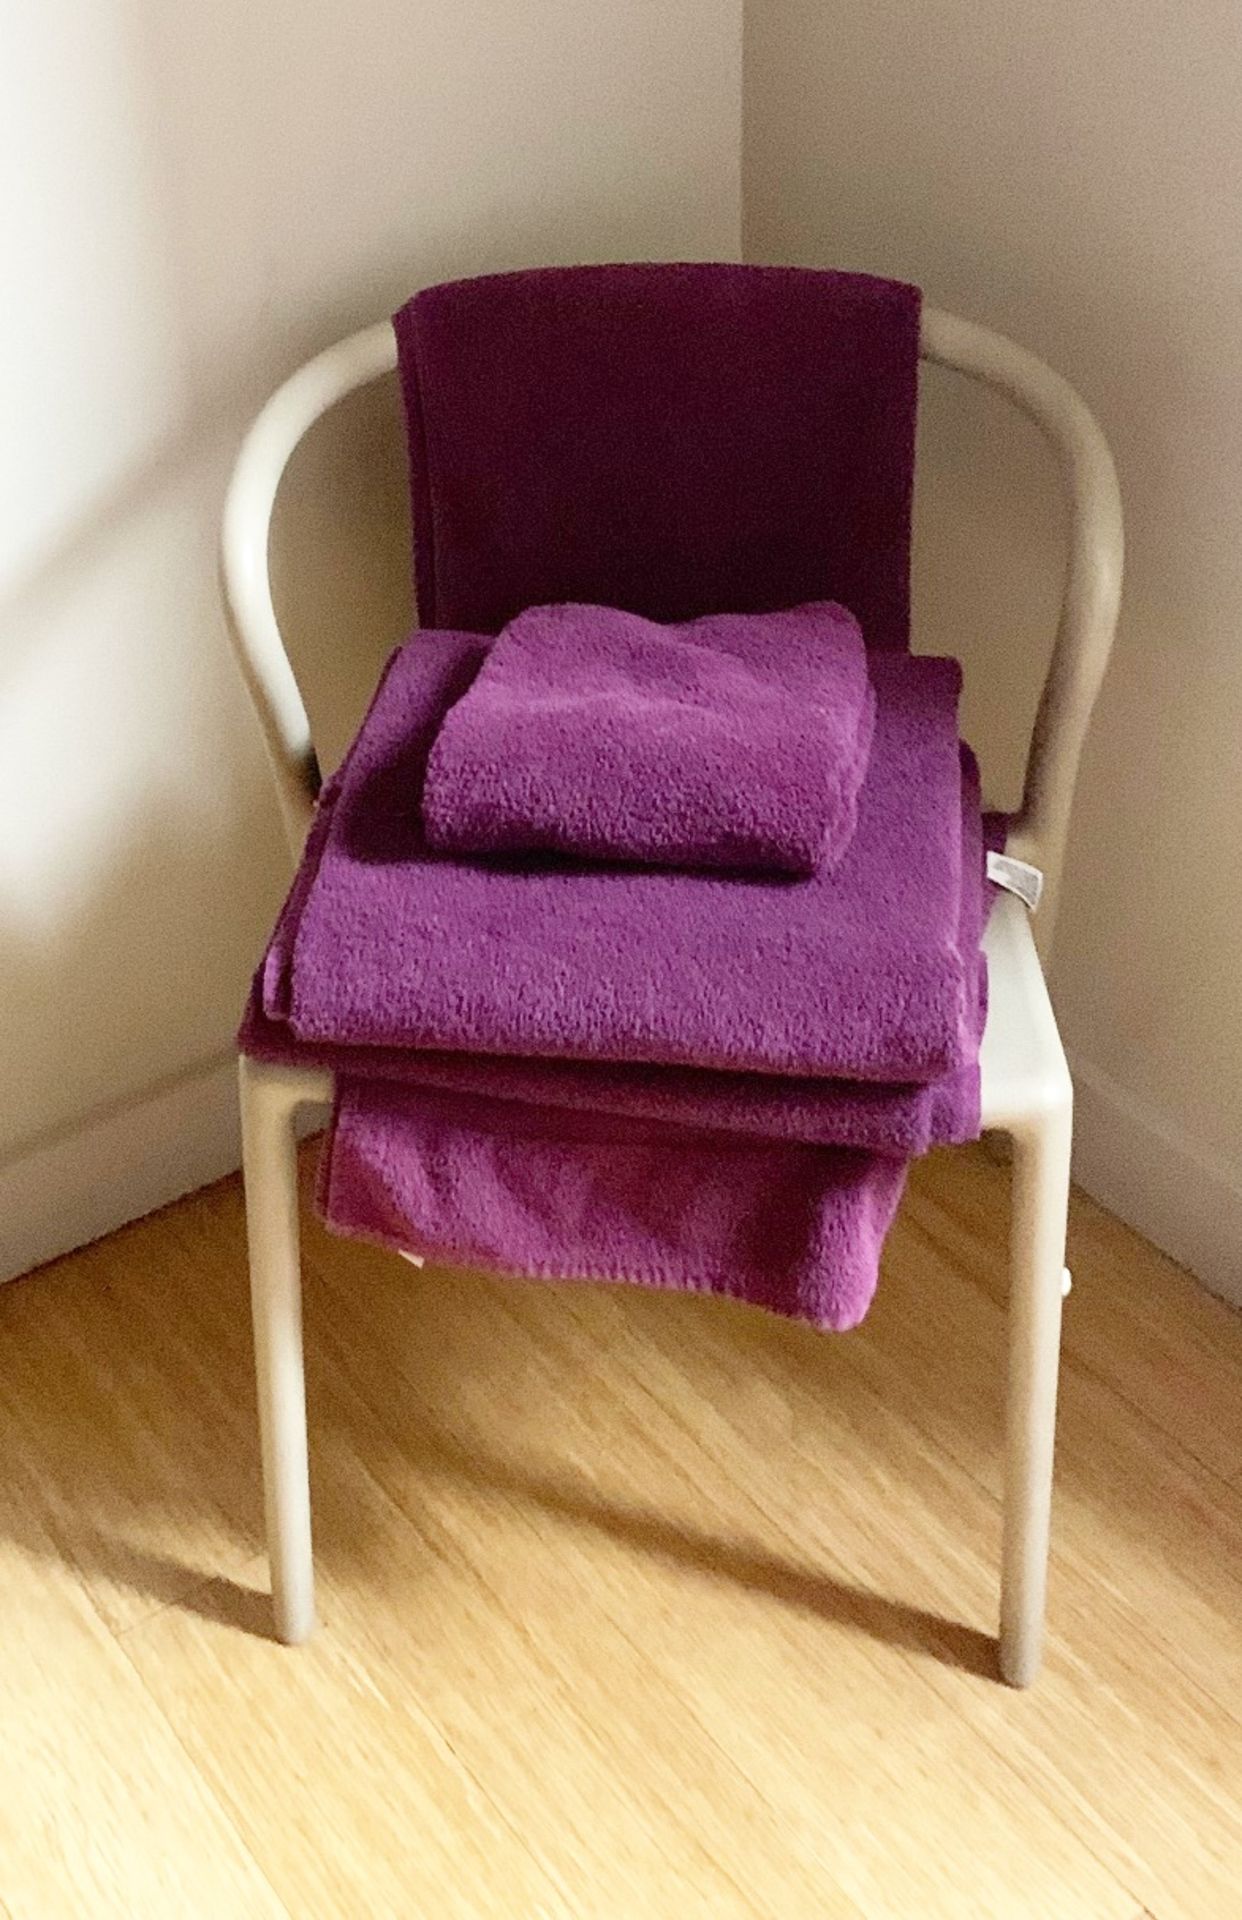 40 x Majestic Luxury 620gsm Bath Towels in Purple - Size SMALL - RRP £240 - CL587 - Location: Altrin - Image 3 of 4